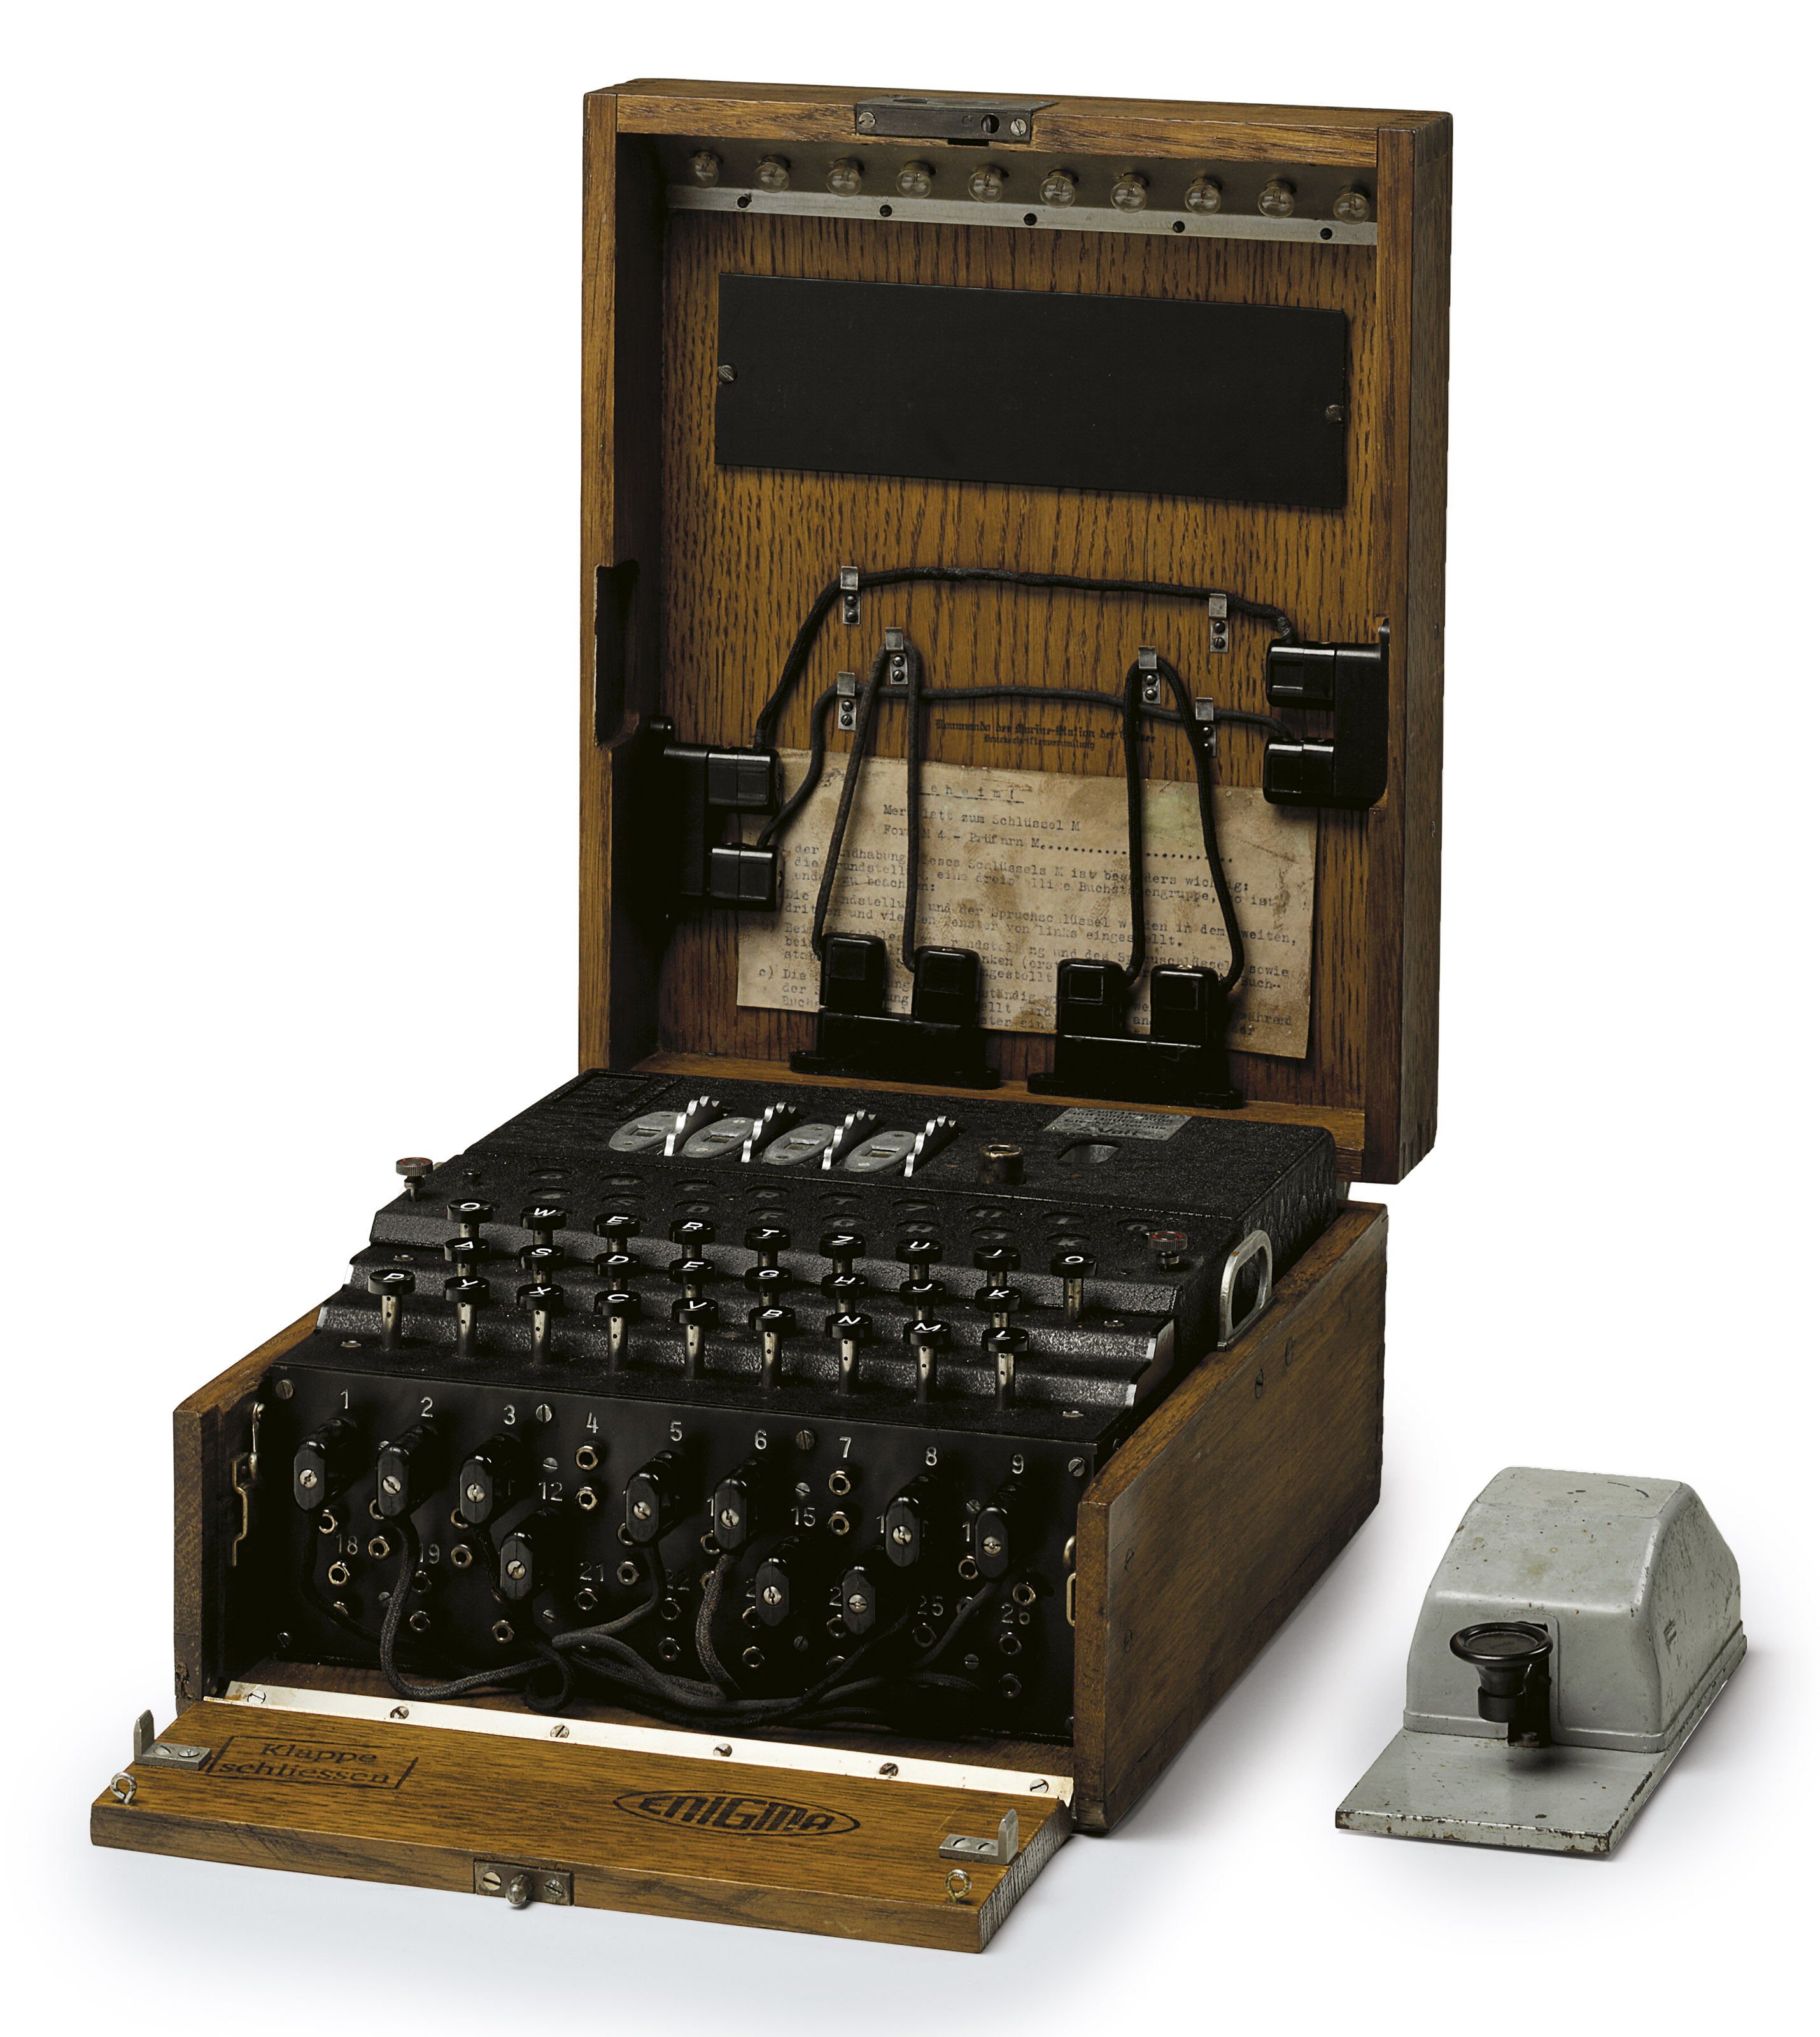 A FOUR-ROTOR (“M4”) ENIGMA CIPHER MACHINE. Olympia ...